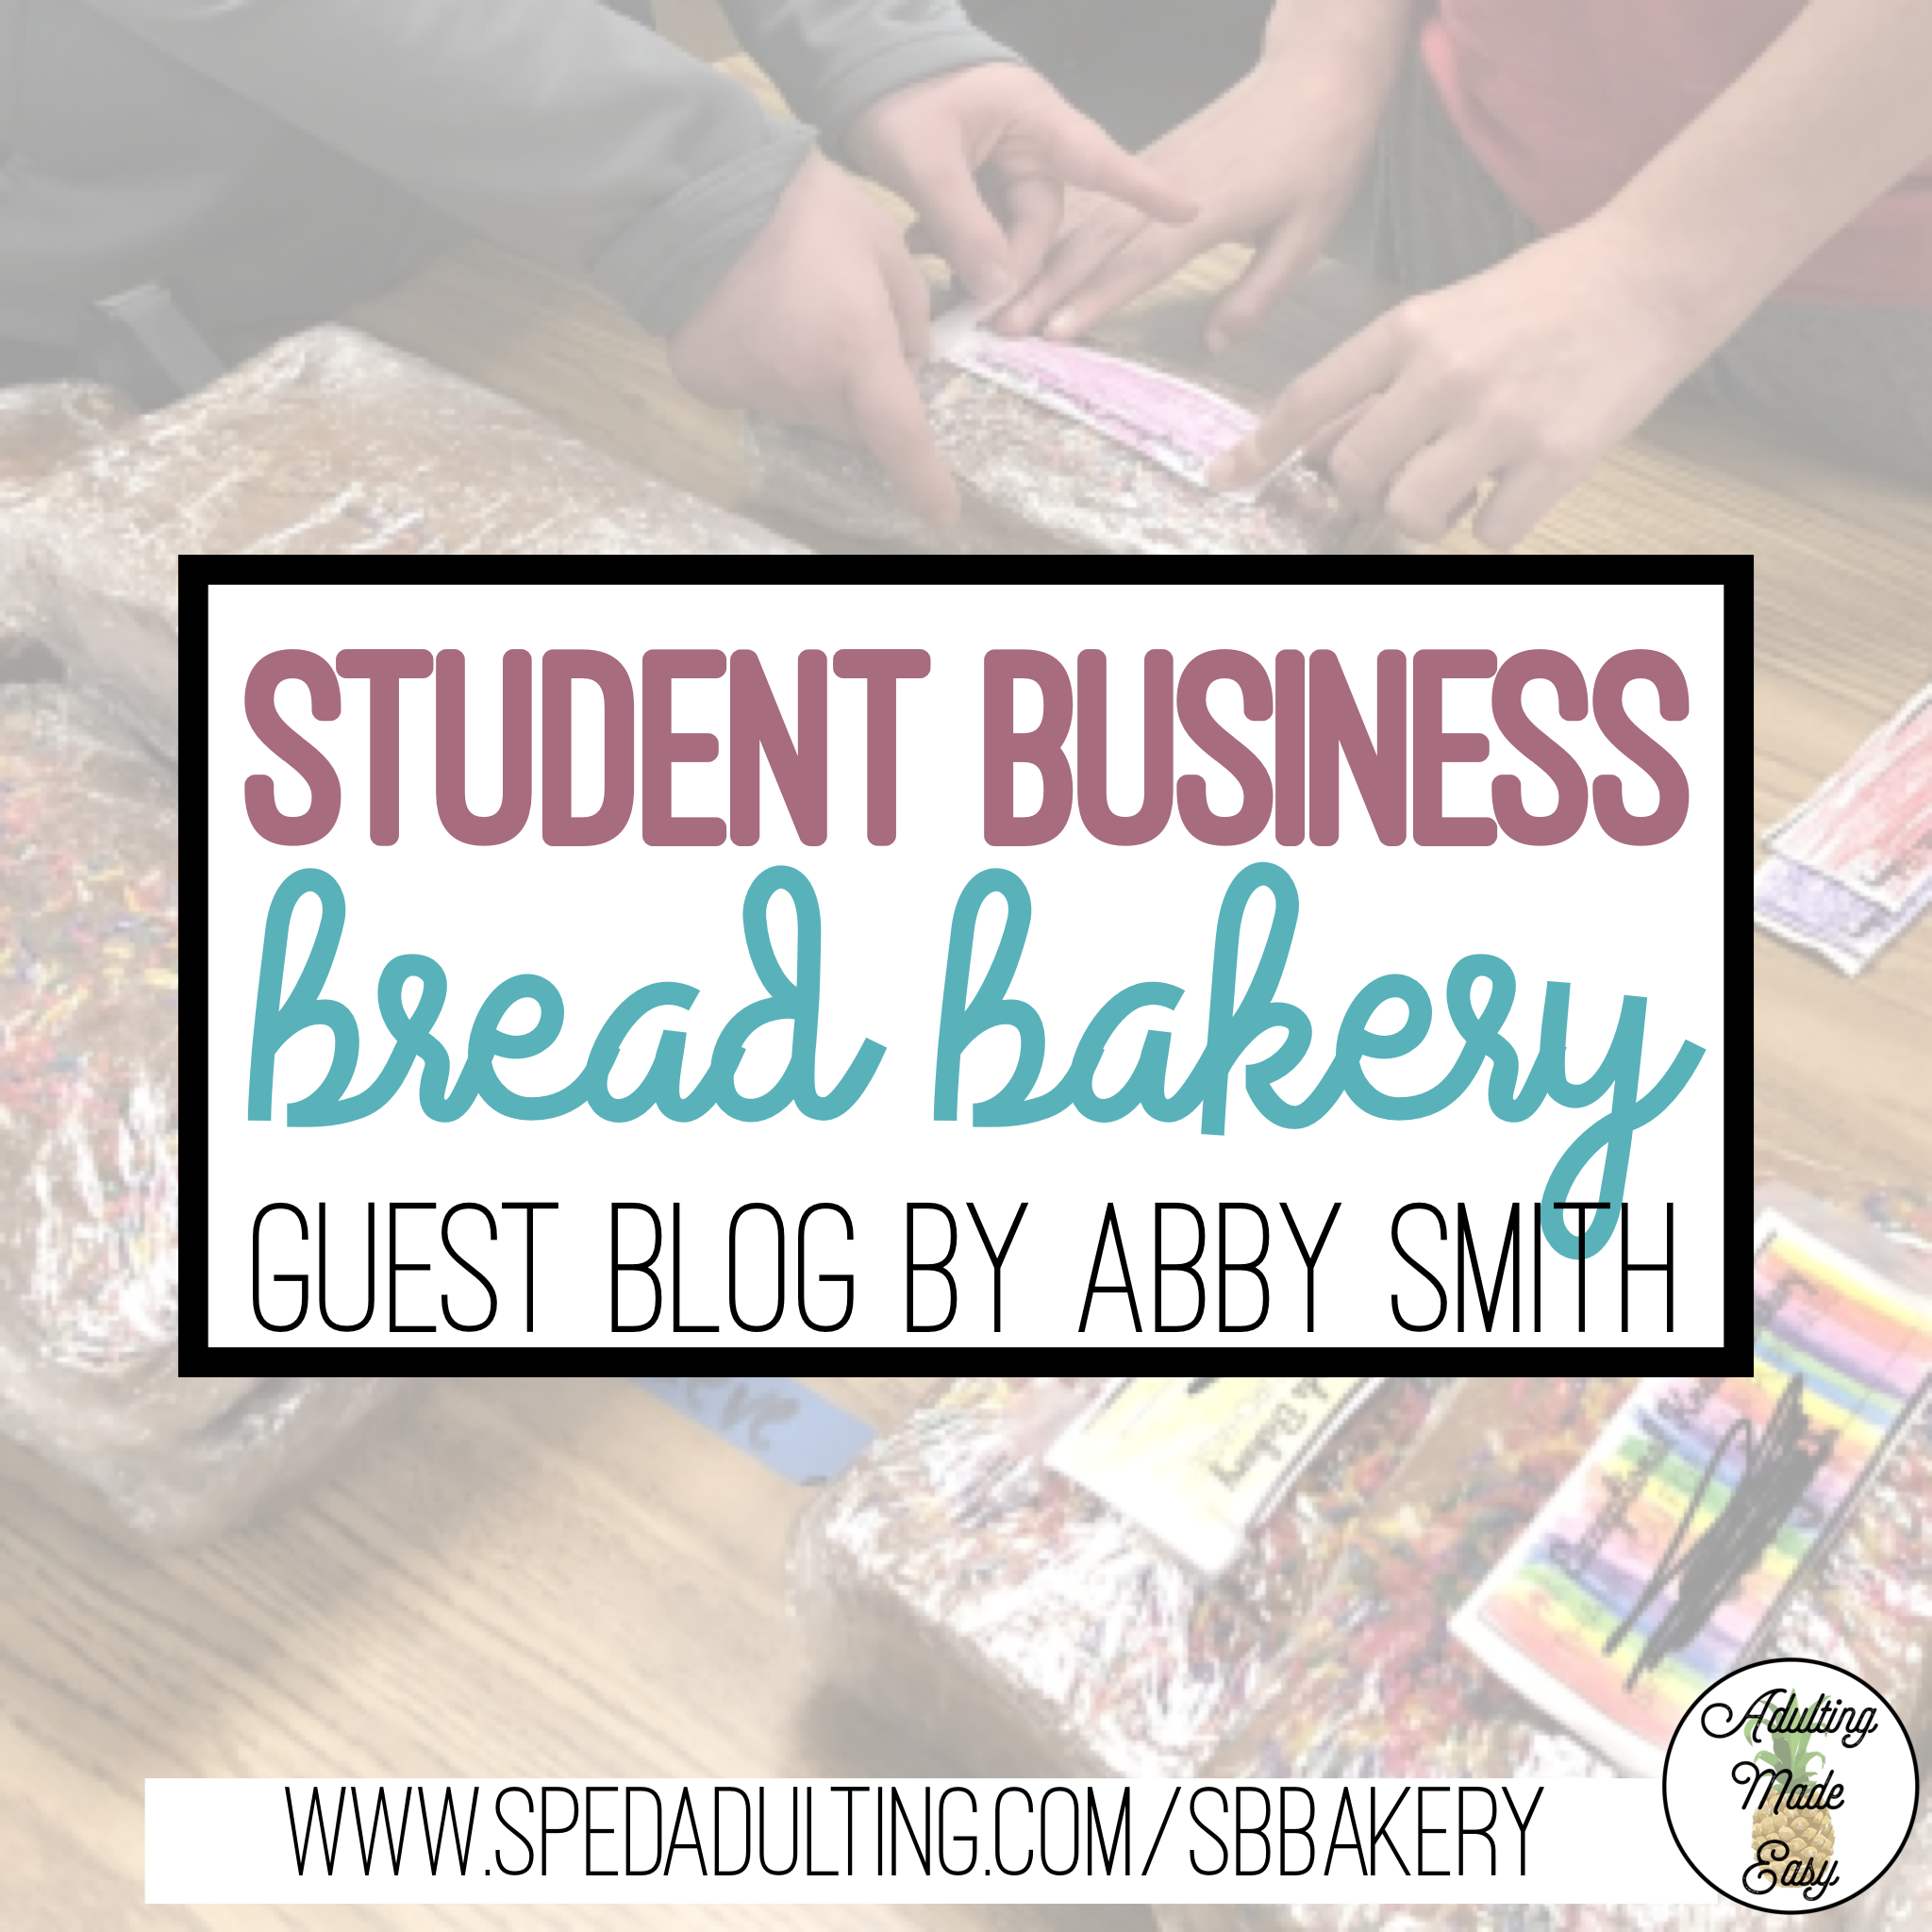 BLOG: Classroom Student Business: Bread Bakery for special education students.